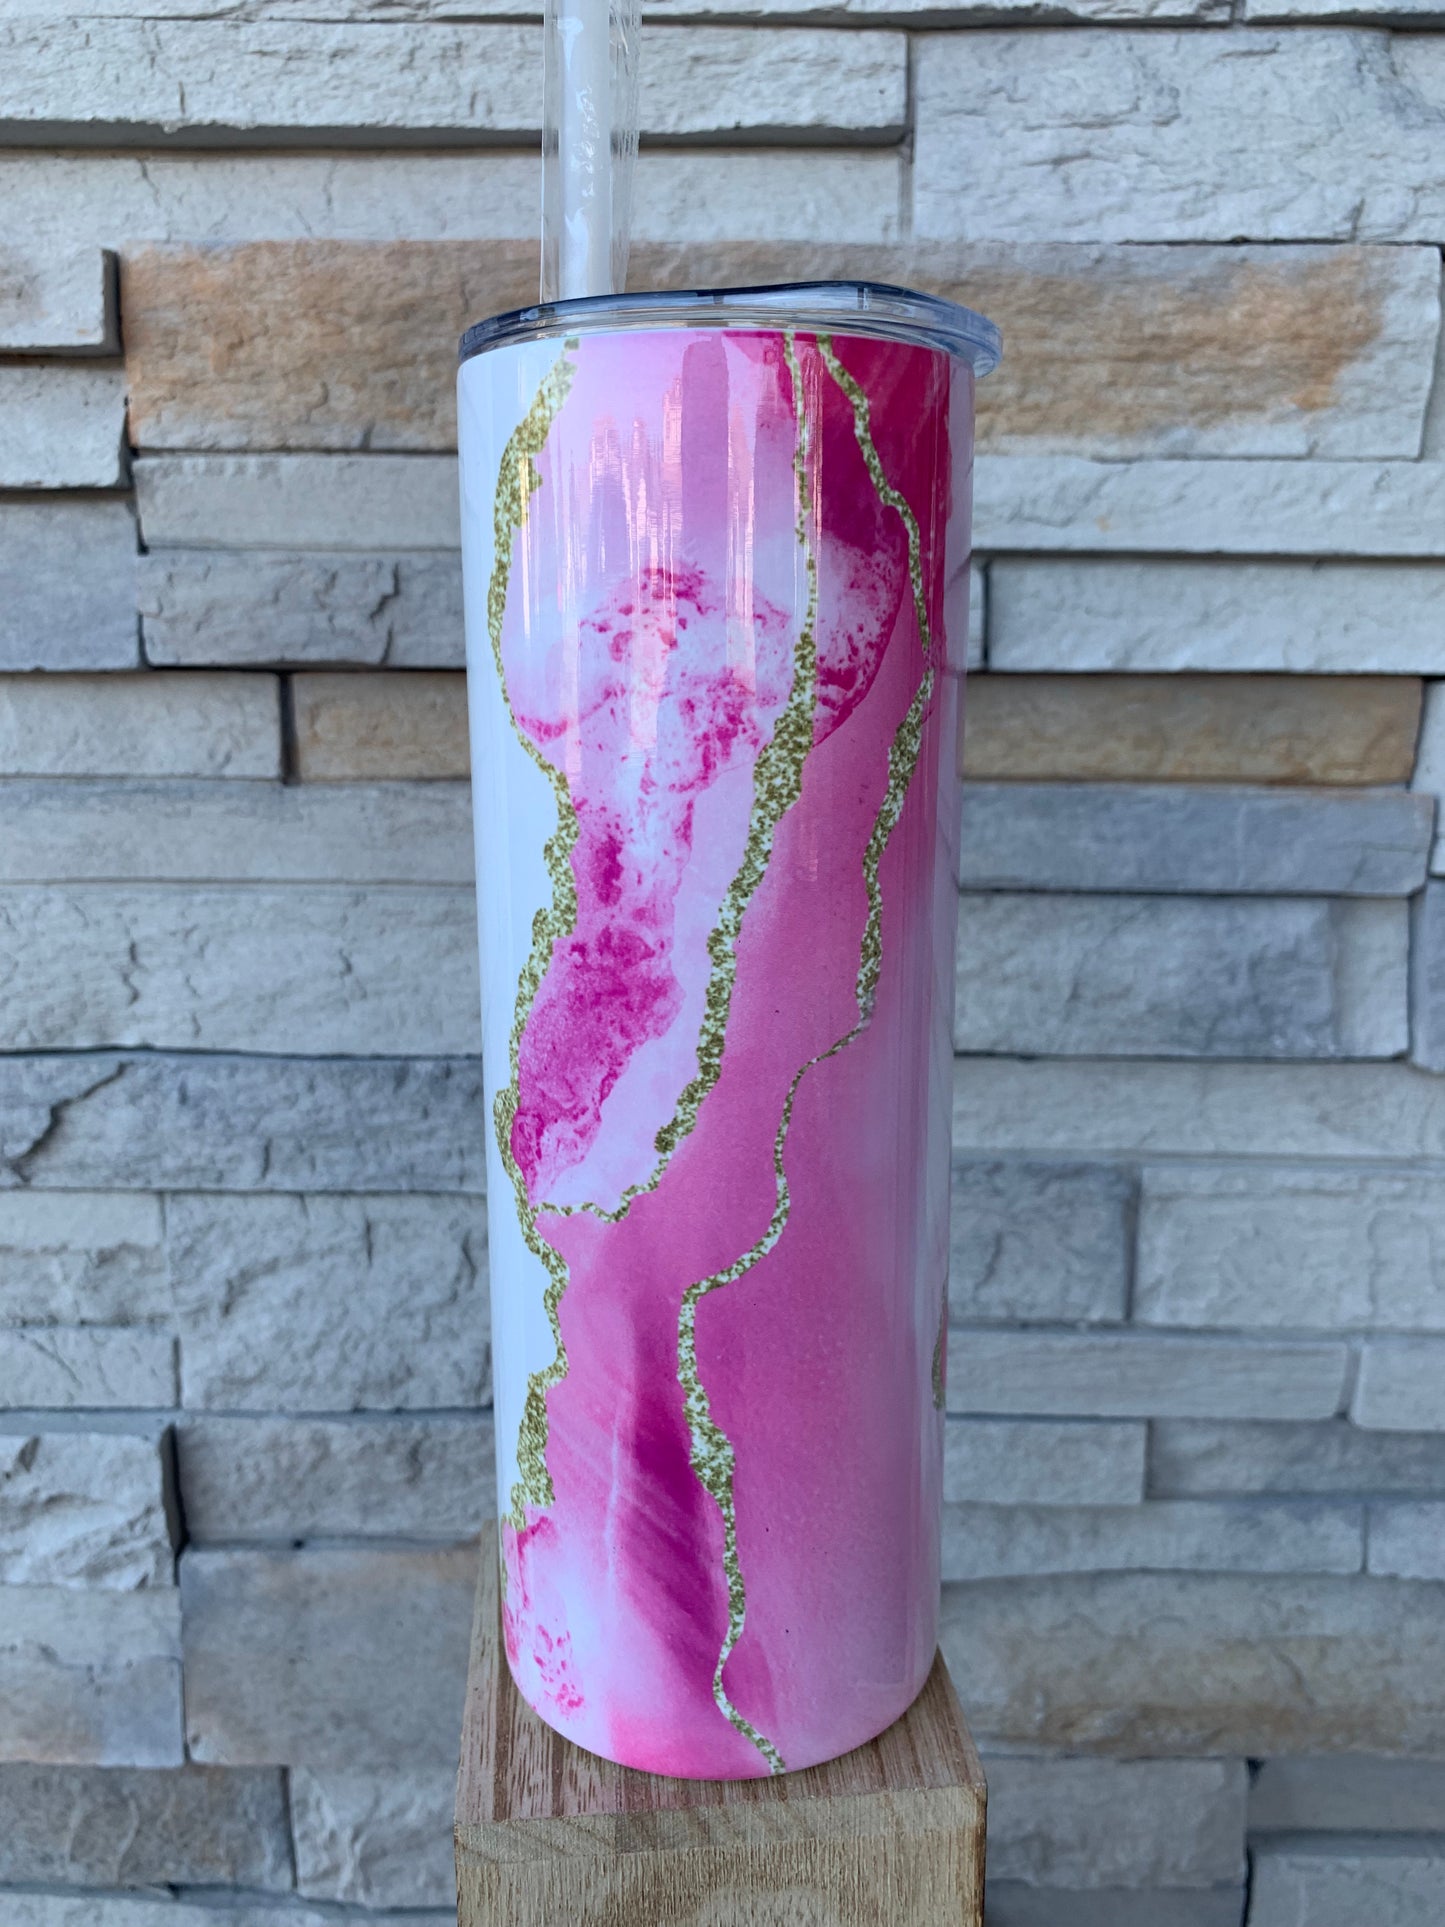 Just a Girl Boss Building Her Empire Shimmer 20oz Skinny Sublimation Tumbler